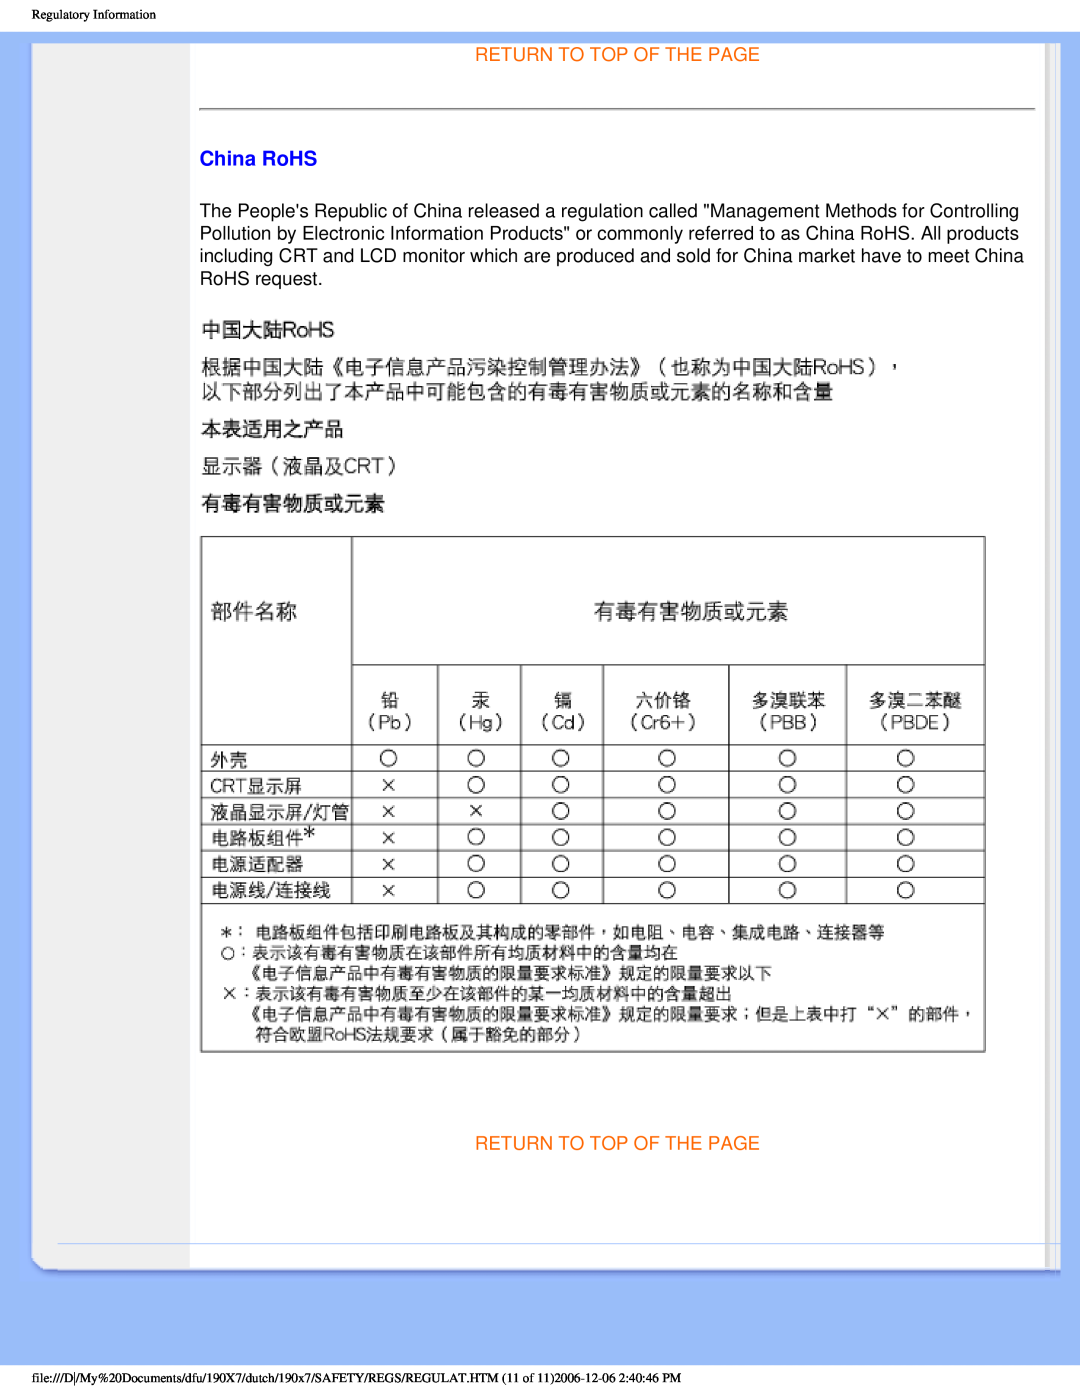 Philips 190X7 user manual China RoHS, Return To Top Of The Page, Regulatory Information 